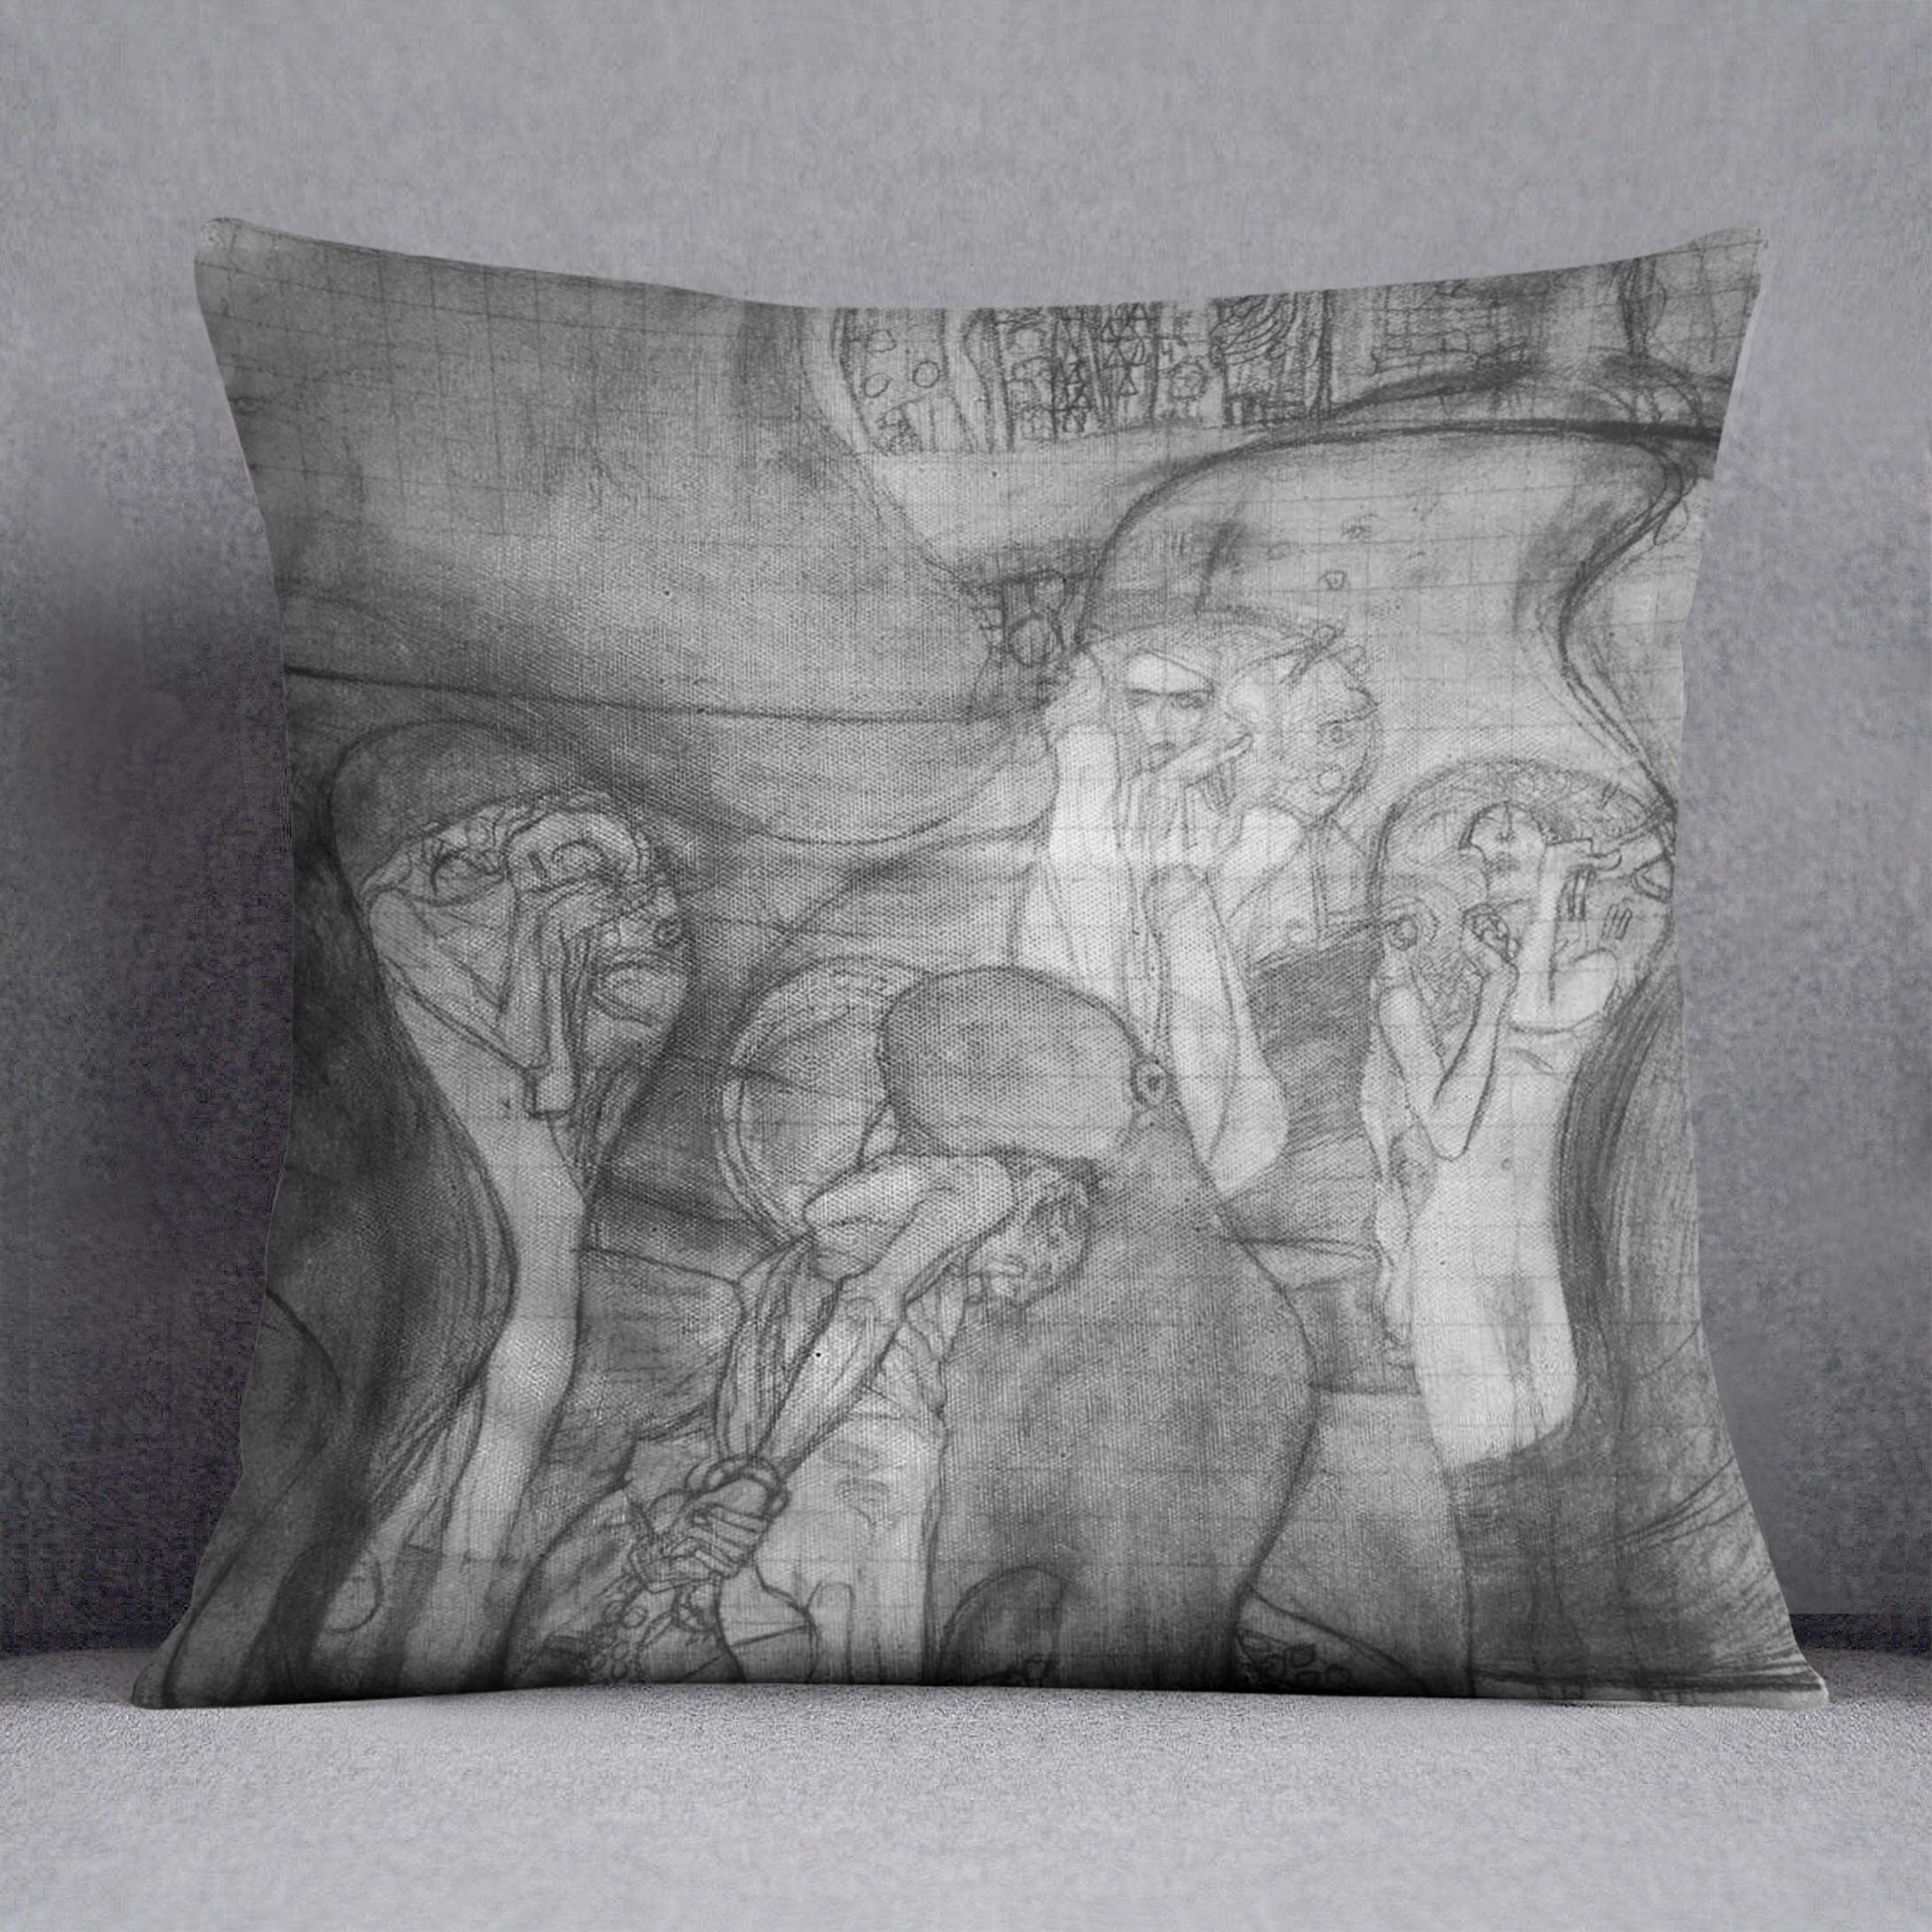 Composition draft of the law faculty image by Klimt Cushion